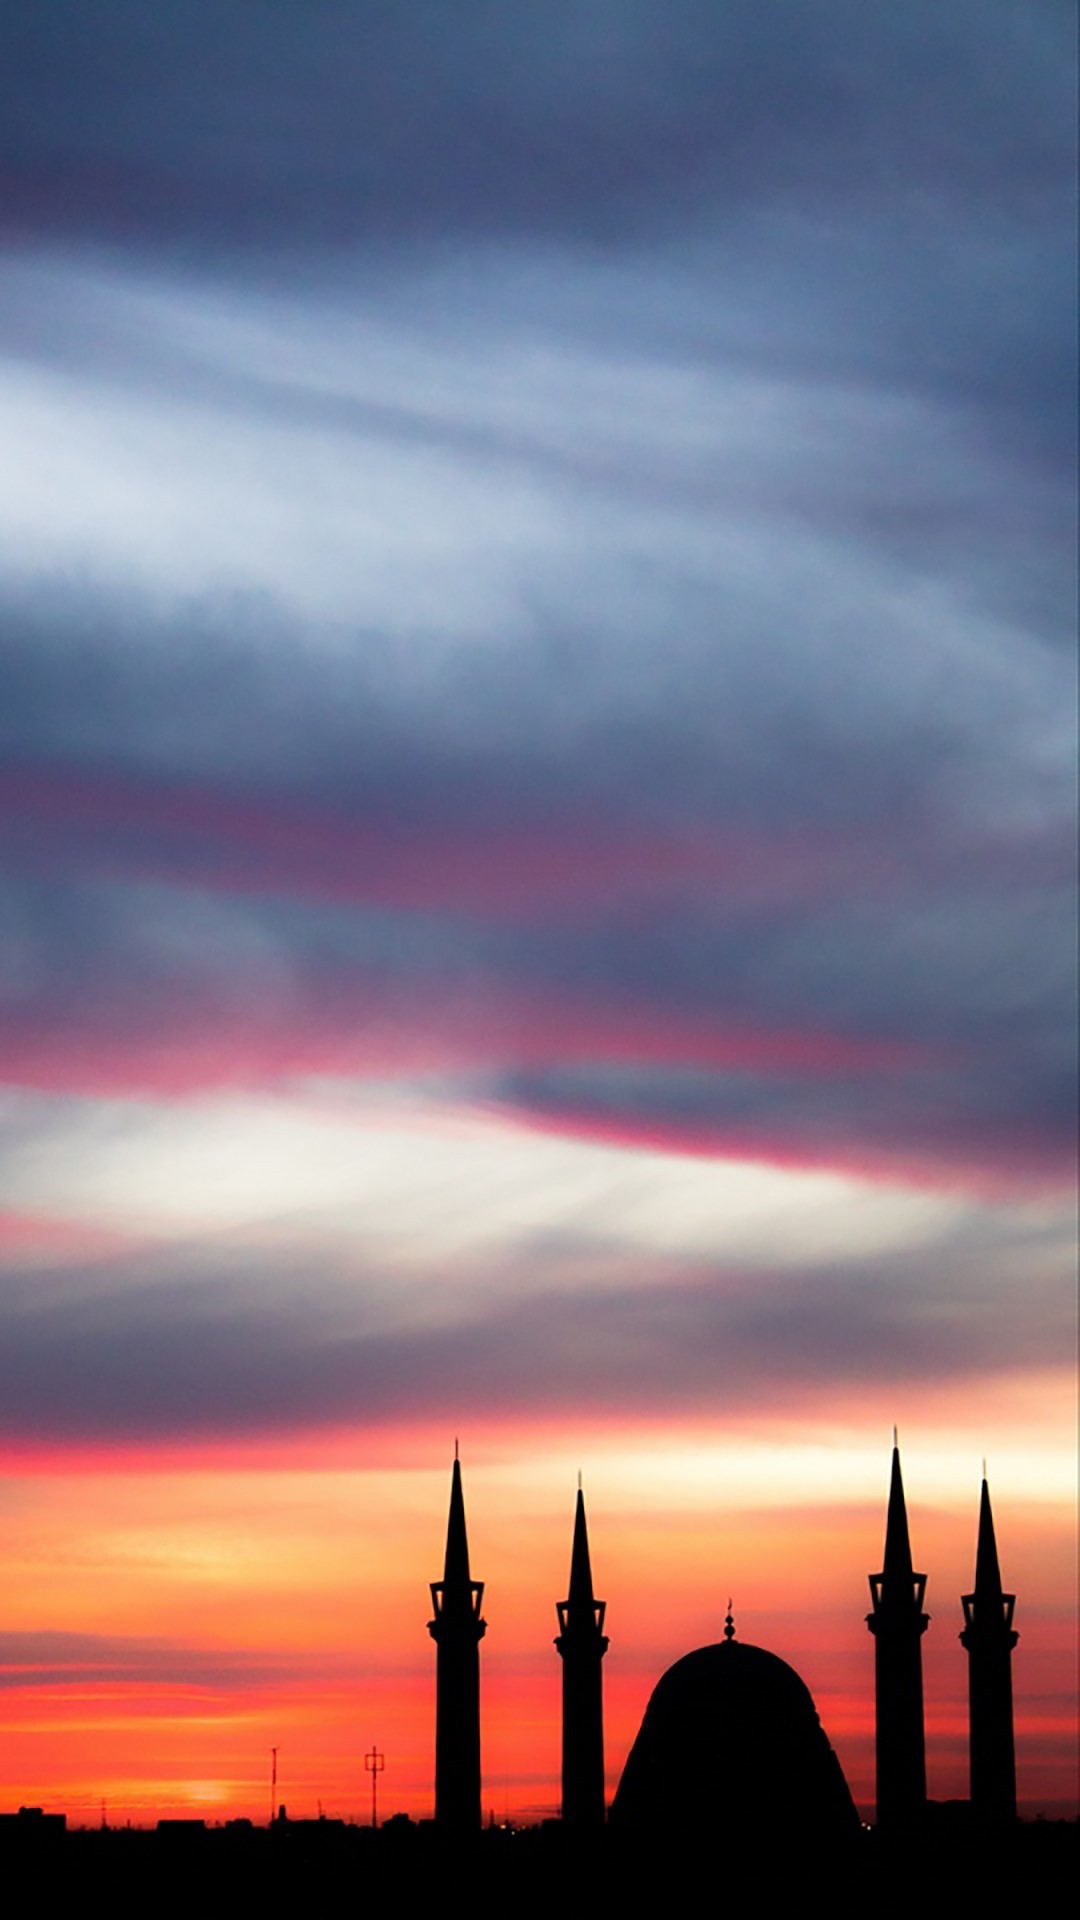 wallpaper untuk android,sky,afterglow,red sky at morning,sunset,cloud